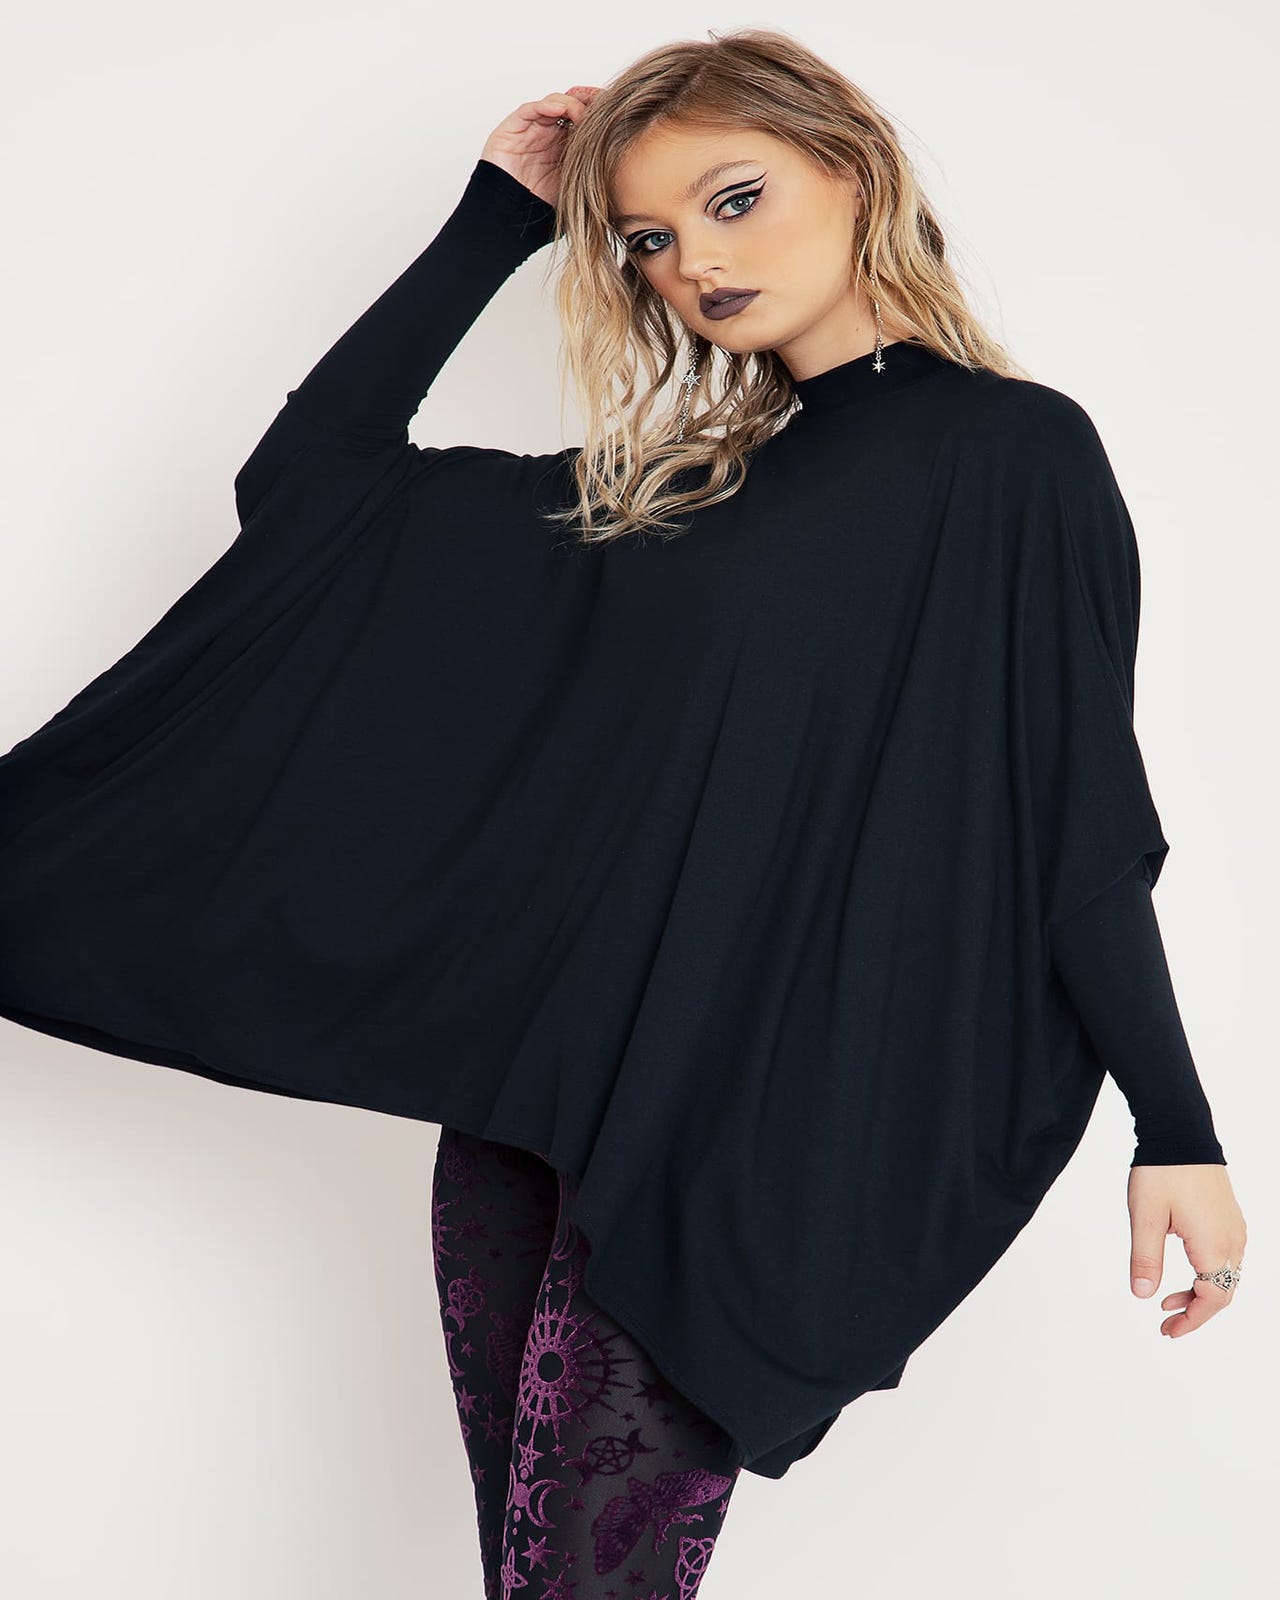 Ultra Batwing Top - Limited